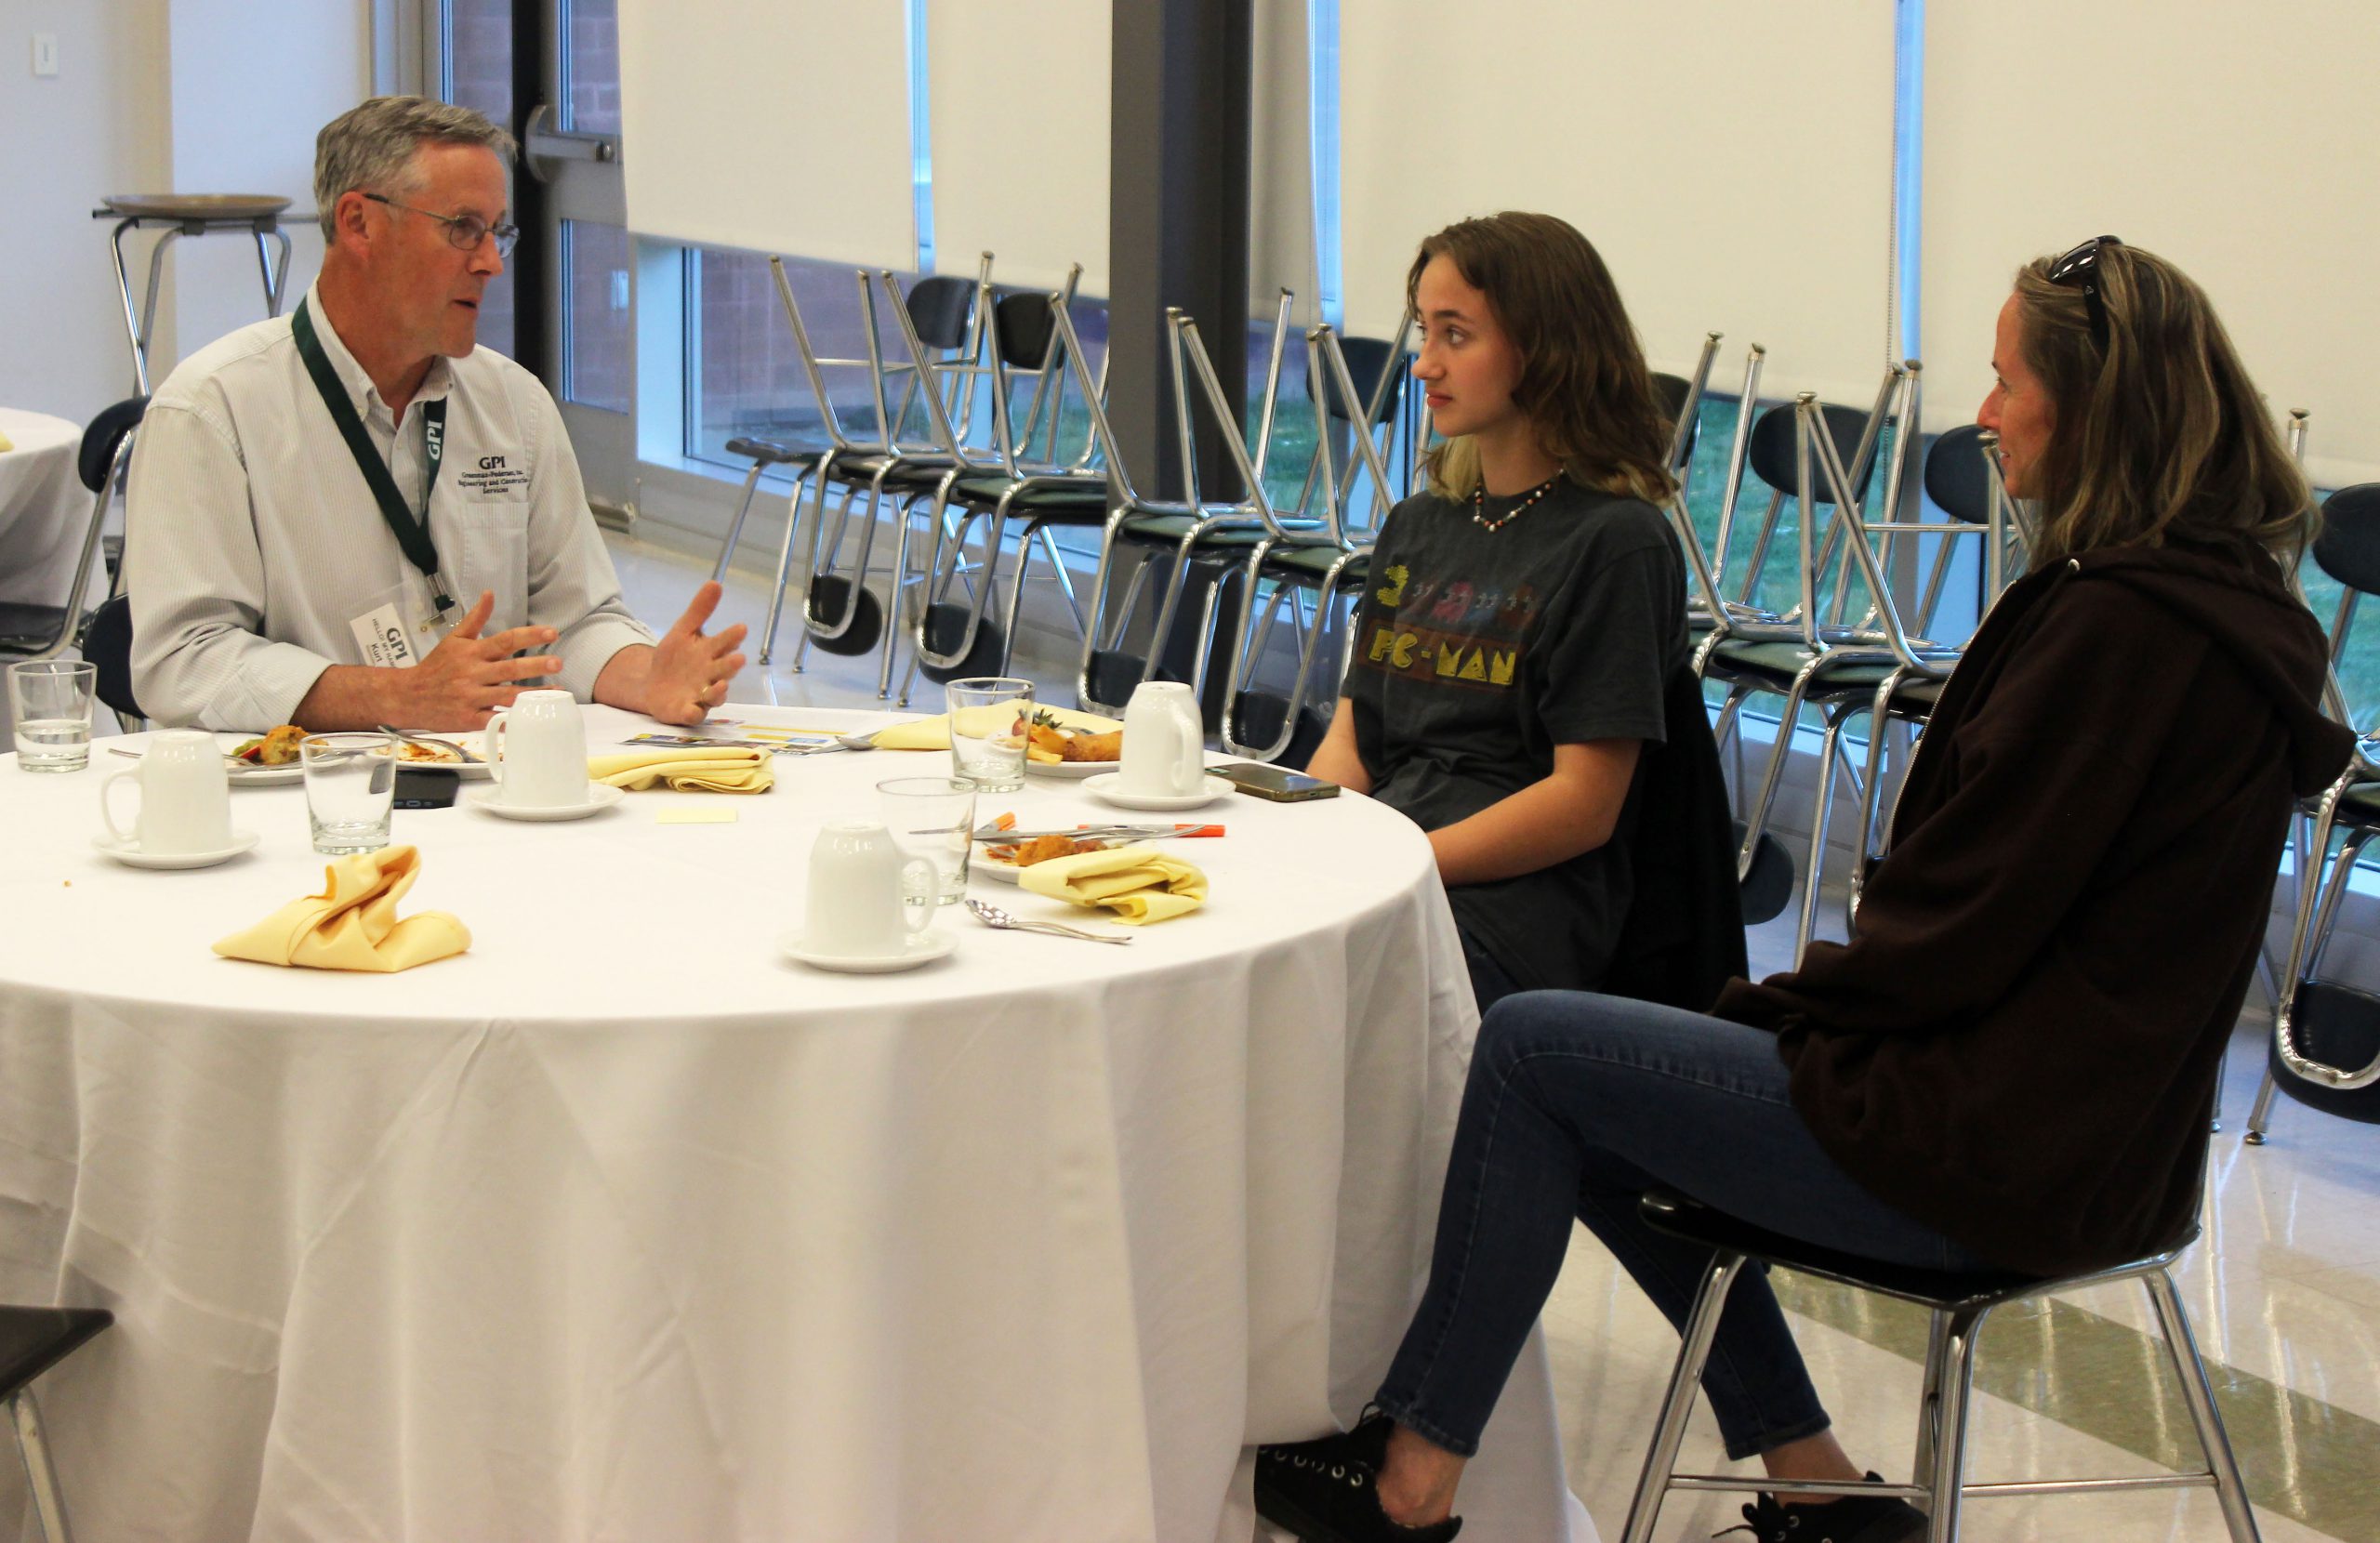 Kurt Weiskotten, an environmental scientist with GPI, sits with a student and family members at a table. 